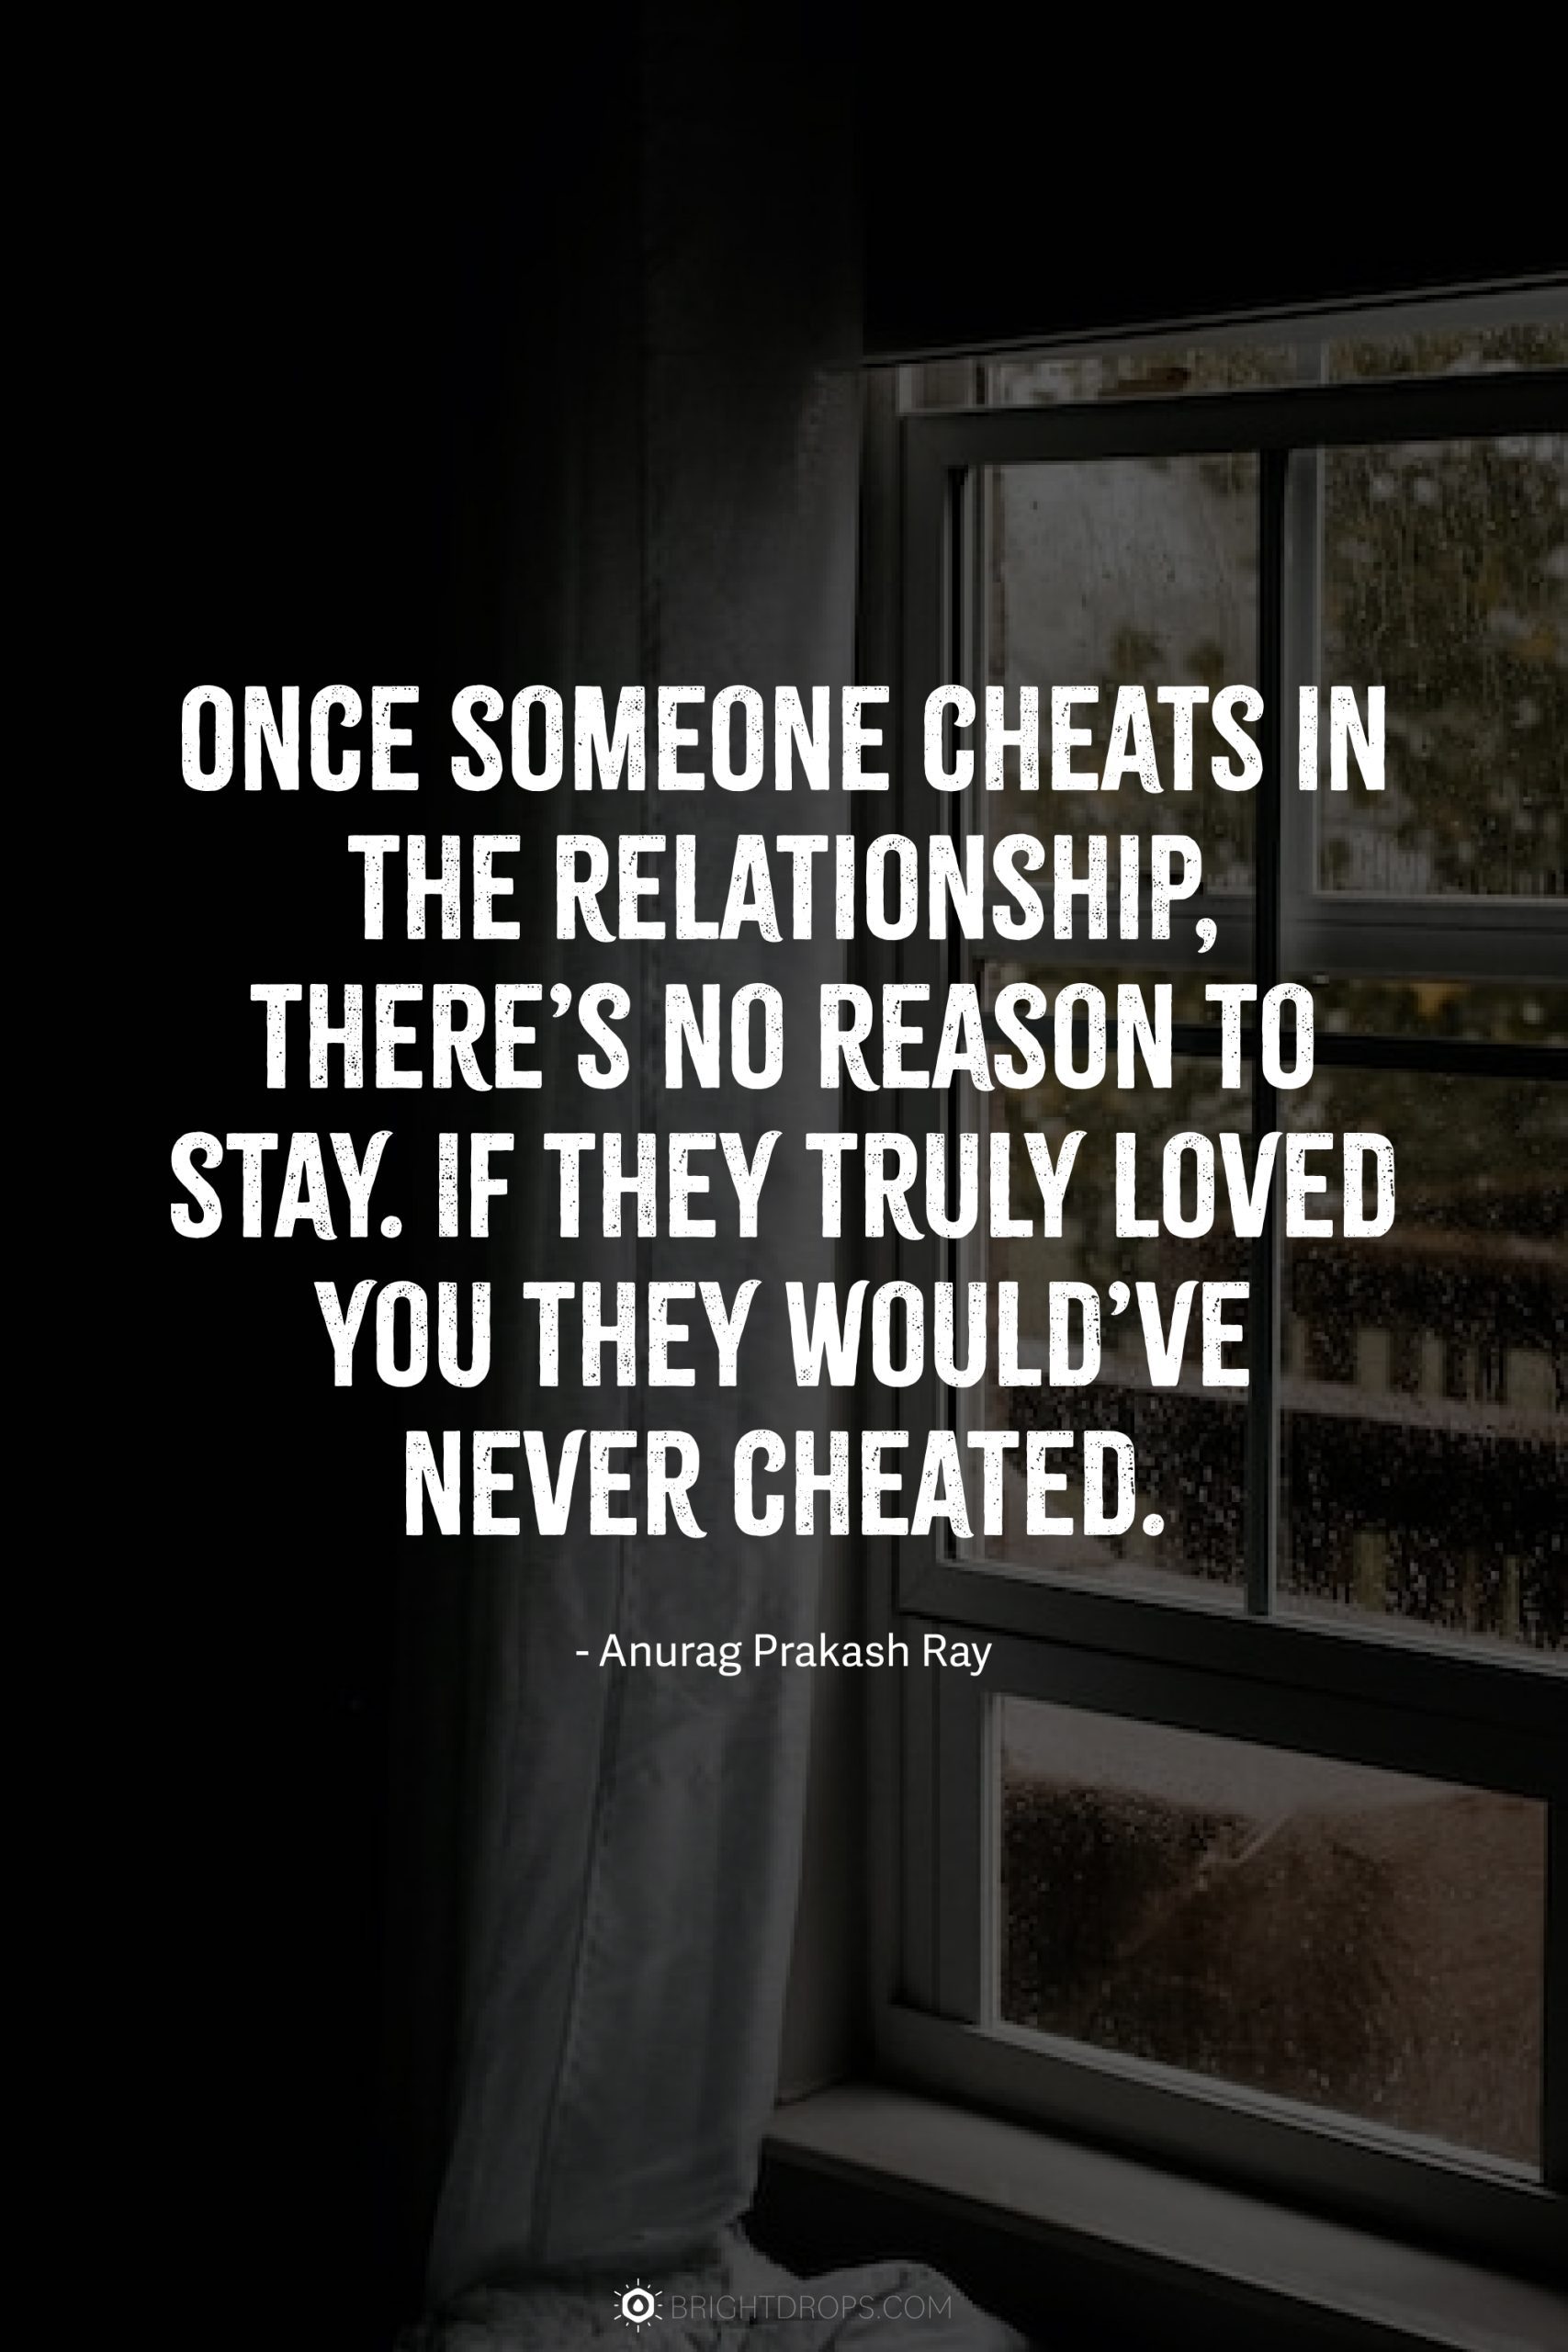 Once someone cheats in the relationship, there’s no reason to stay. If they truly loved you they would’ve never cheated.